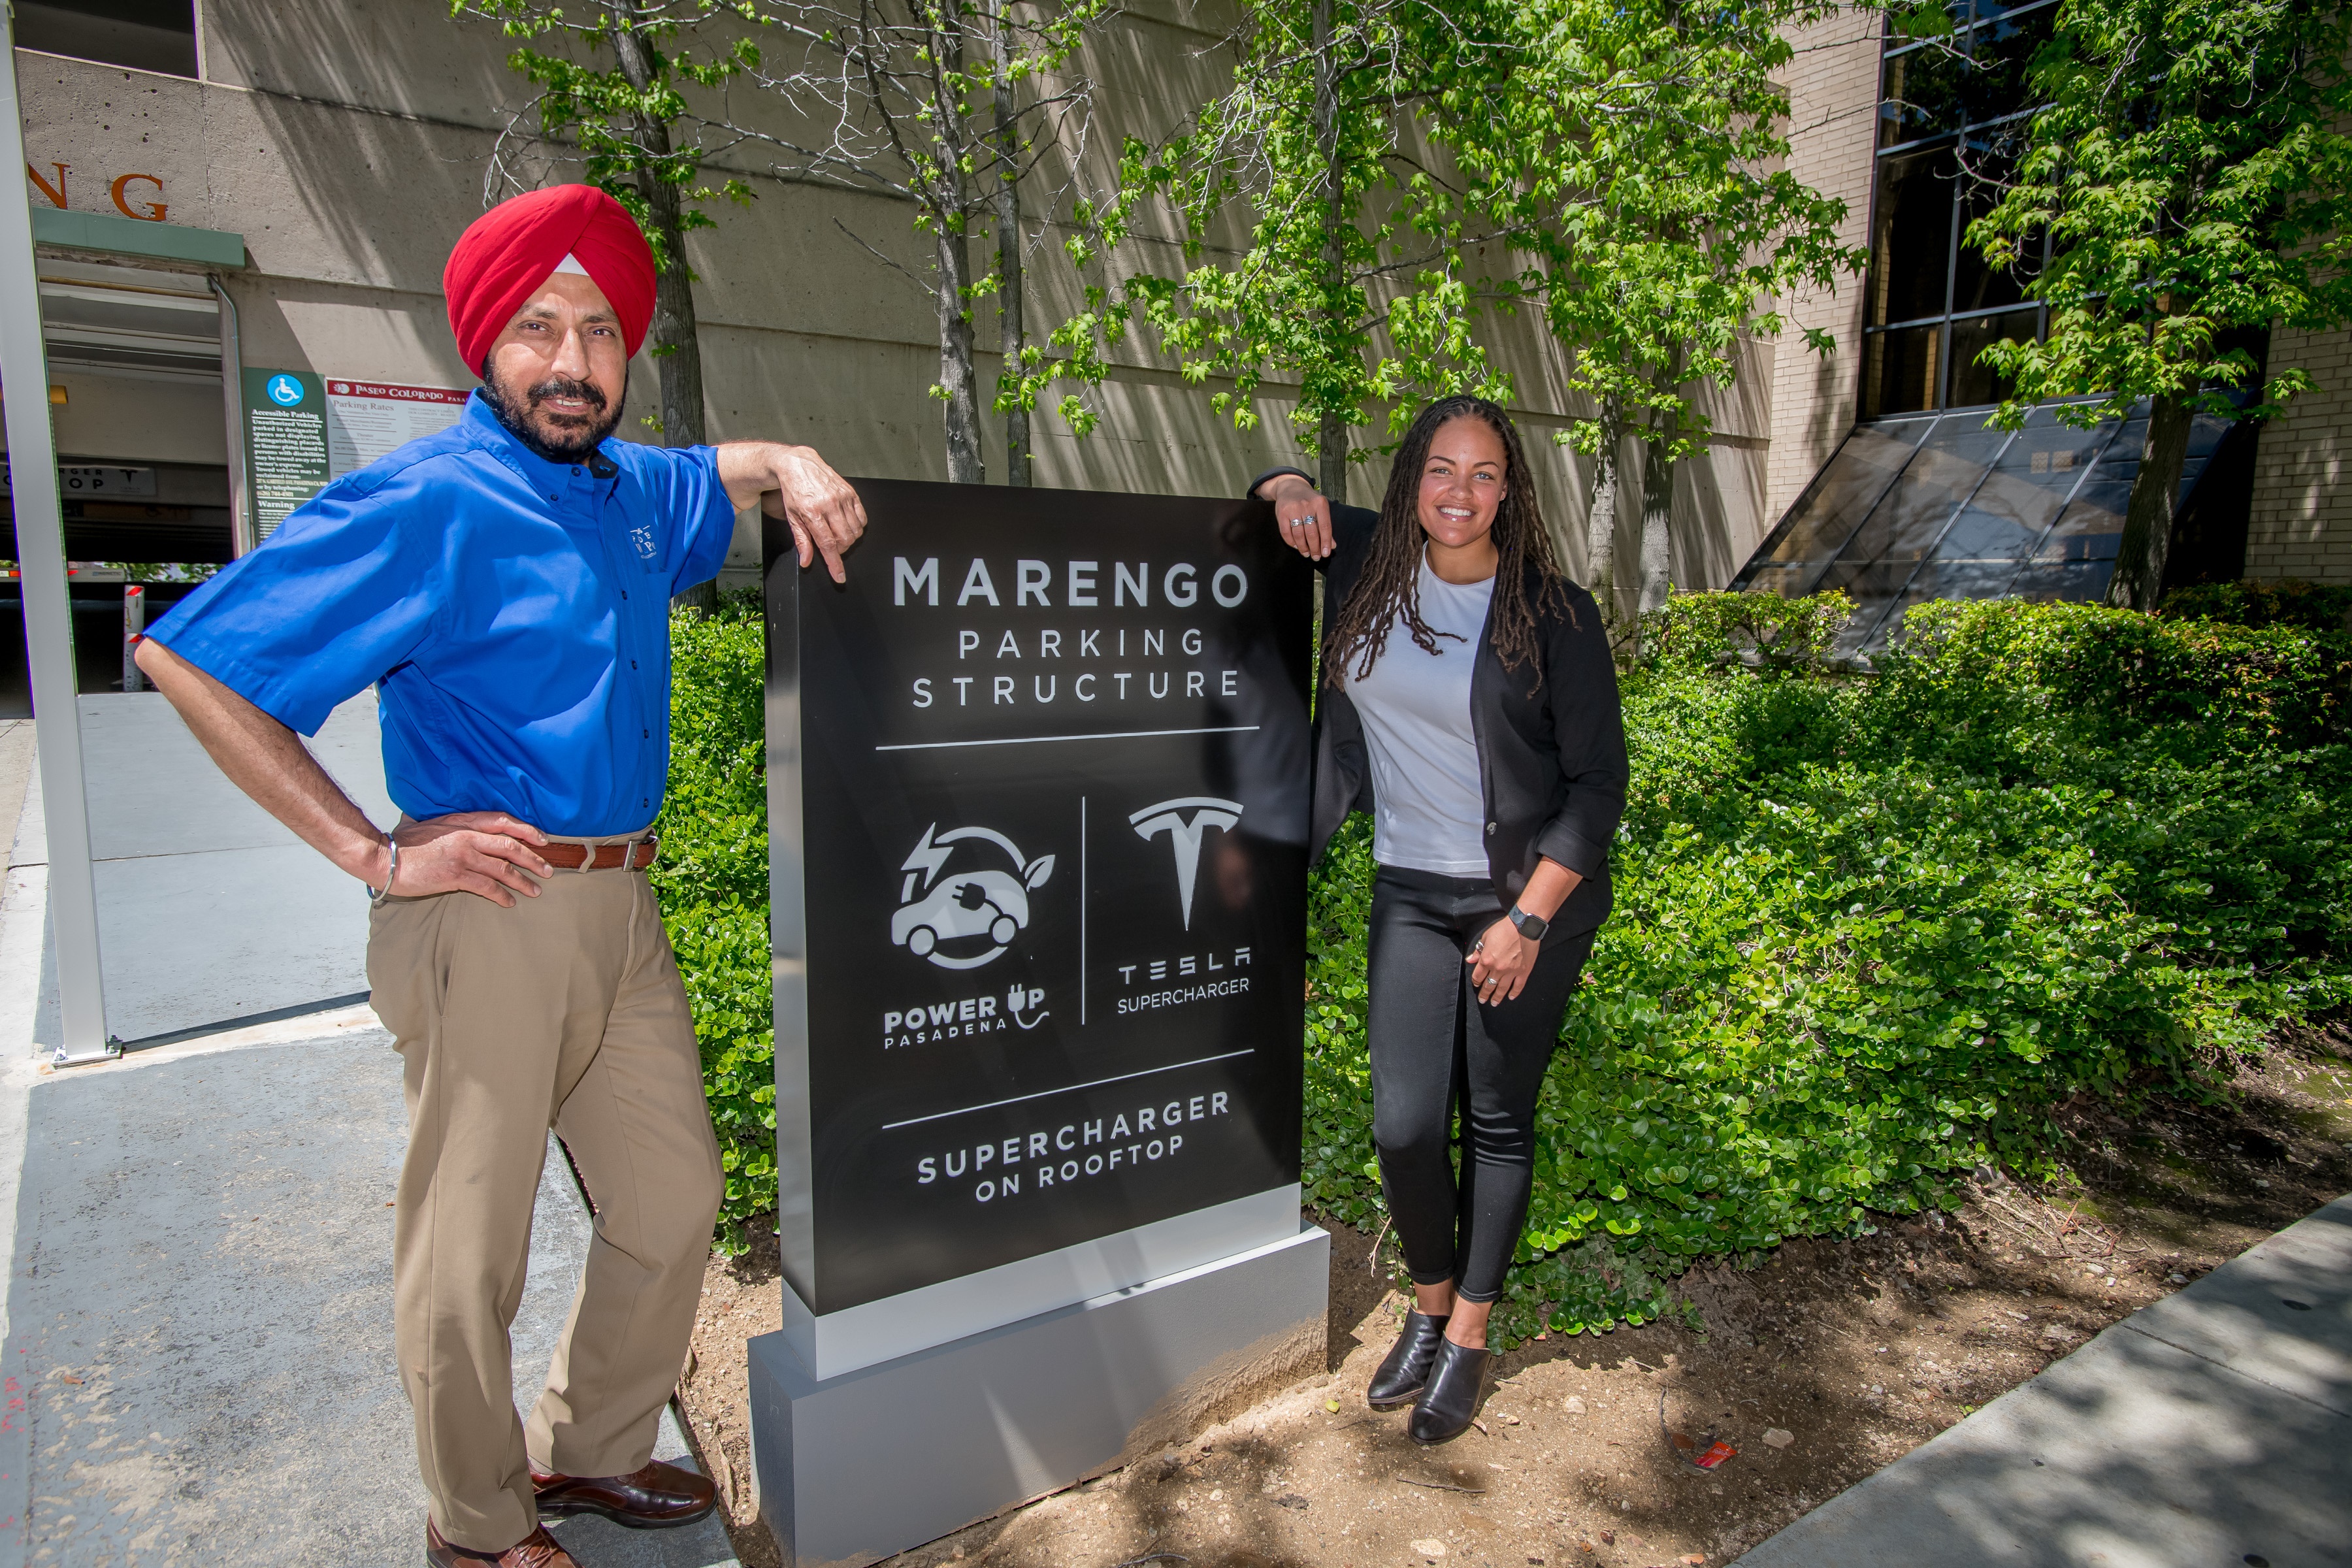 Pasadena Water and Power general manager Gurcharan Bawa and Tesla's Regional Manager Taylor Steele at Marengo Charging Plaza